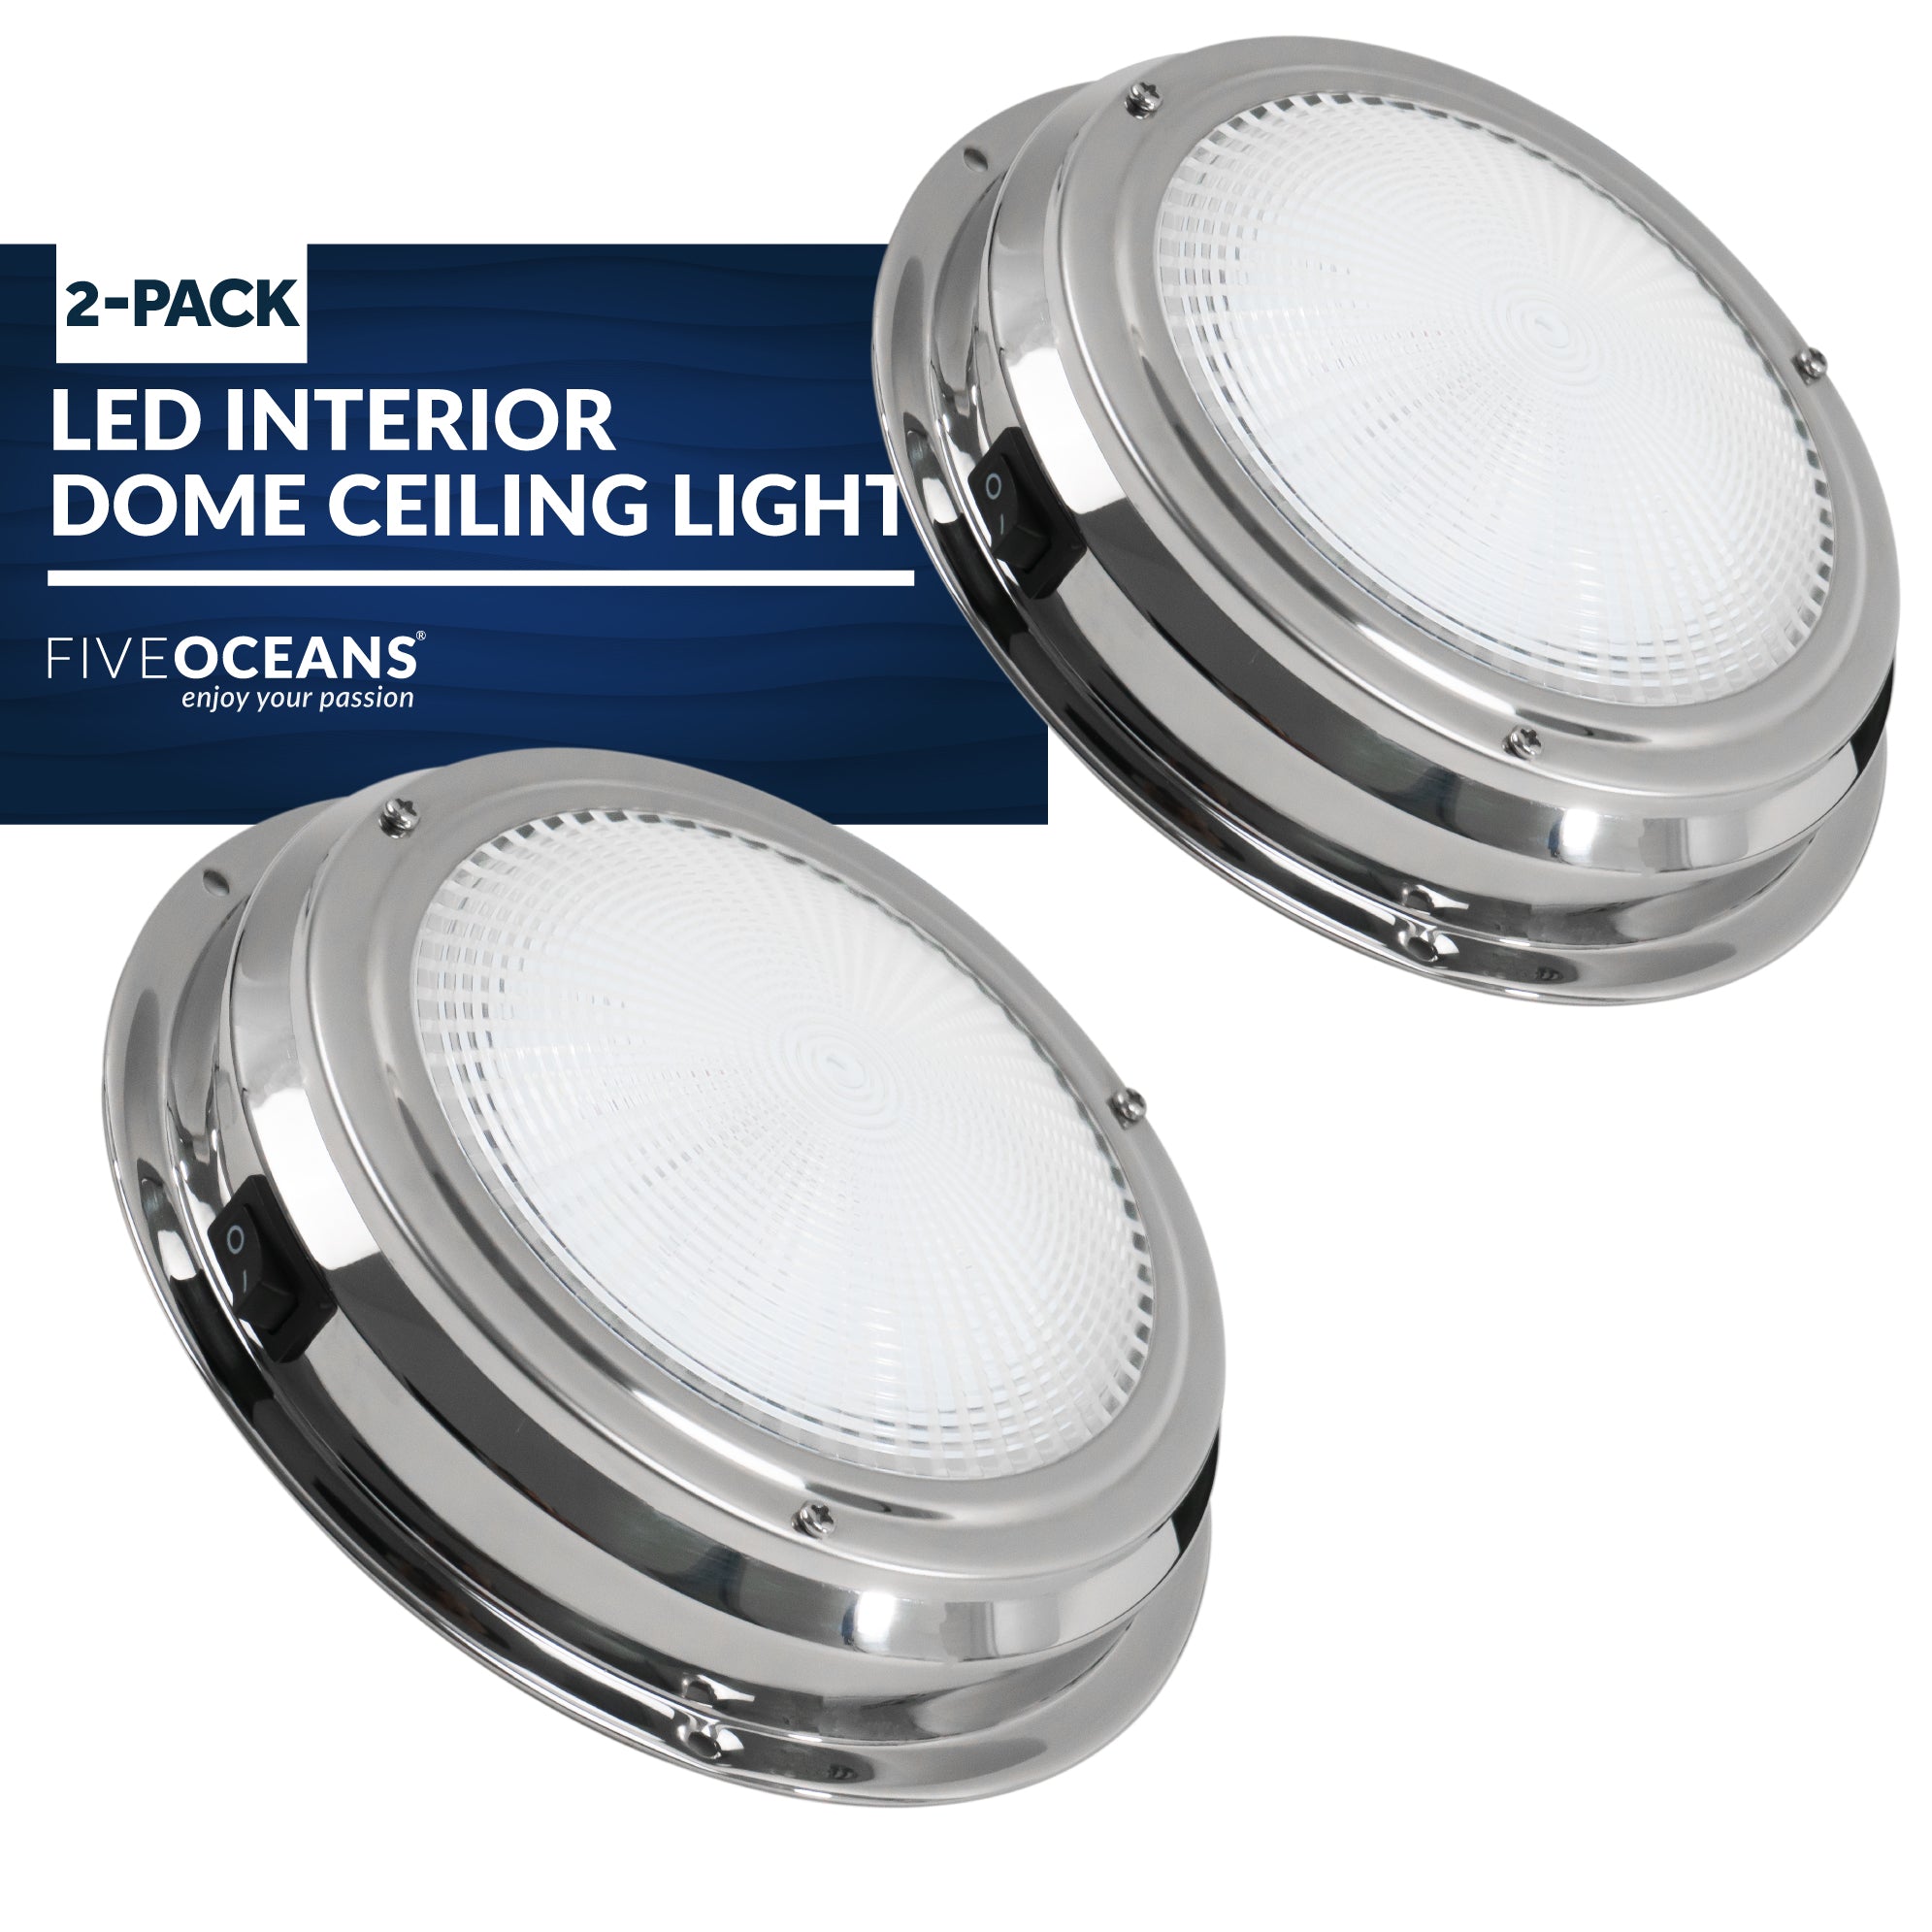 LED Interior Dome Ceiling Light, 6" Surface Mount, Daylight White, 2-Pack - FO2625-M2